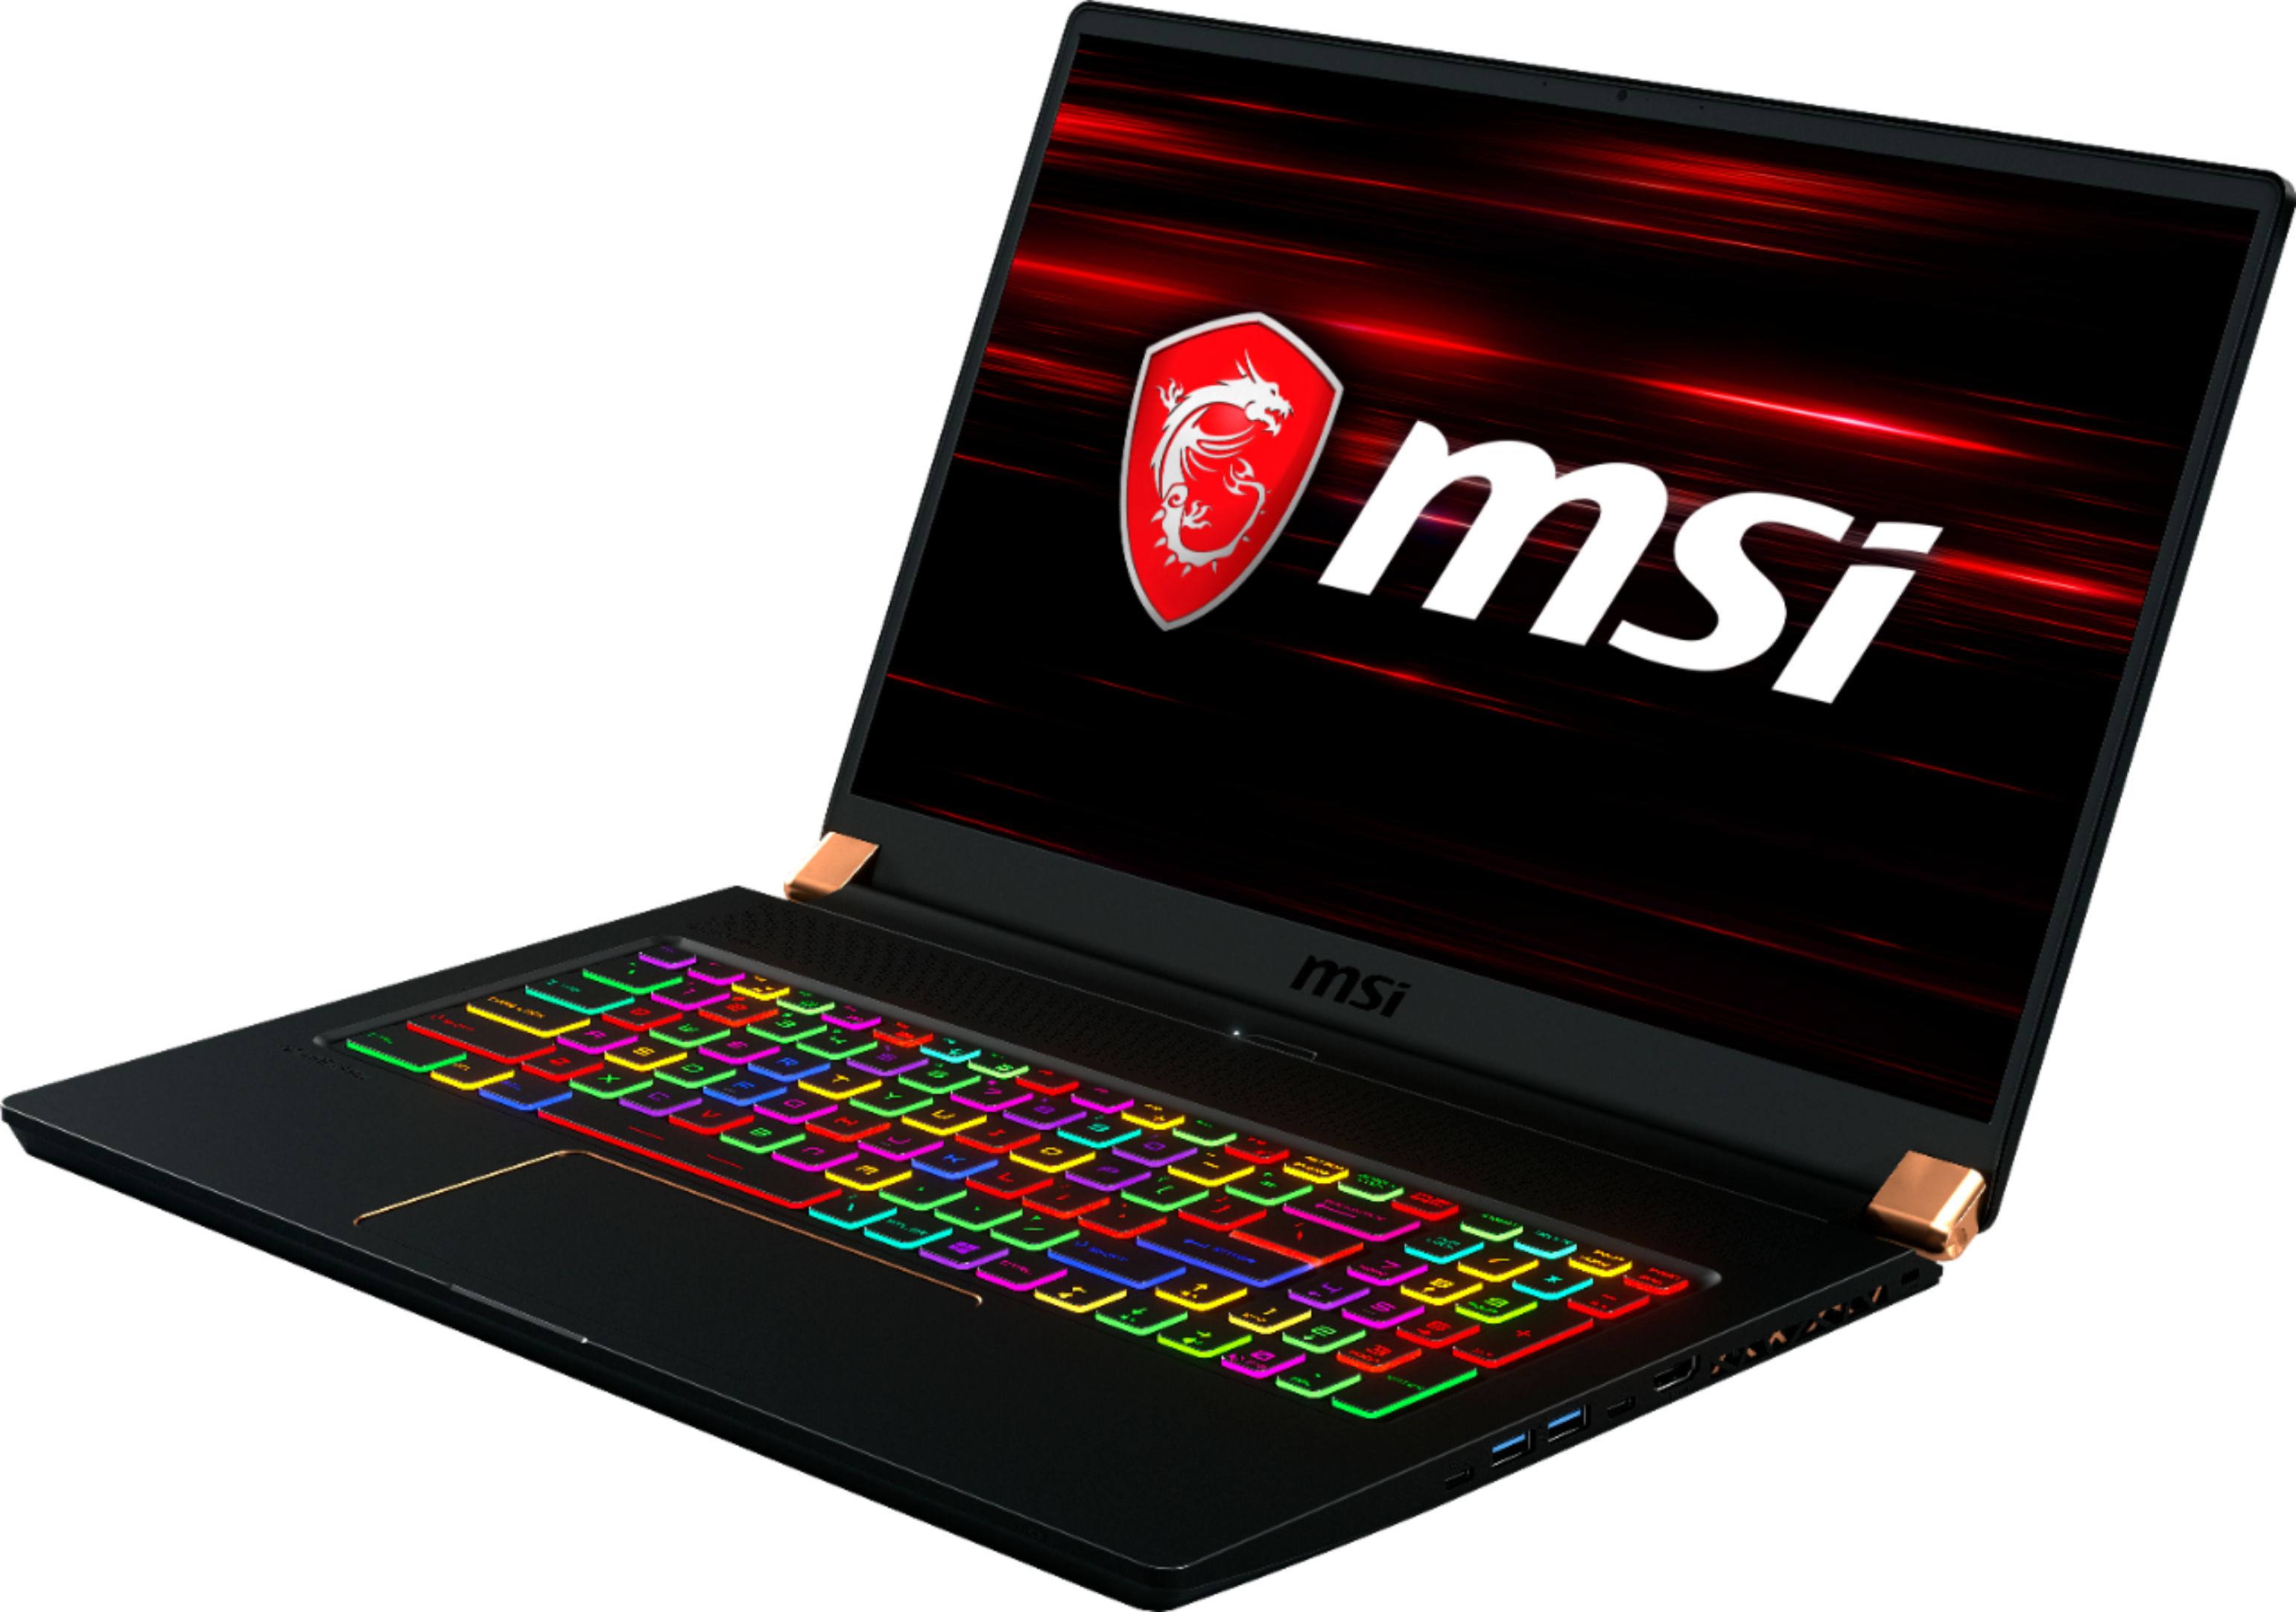 Best Buy: MSI 15.6 Gaming Laptop Intel Core i7 16GB Memory NVIDIA GeForce  GTX 1070 512GB Solid State Drive Matte Black With Gold Diamond Cut GS65  STEALTH THIN-037